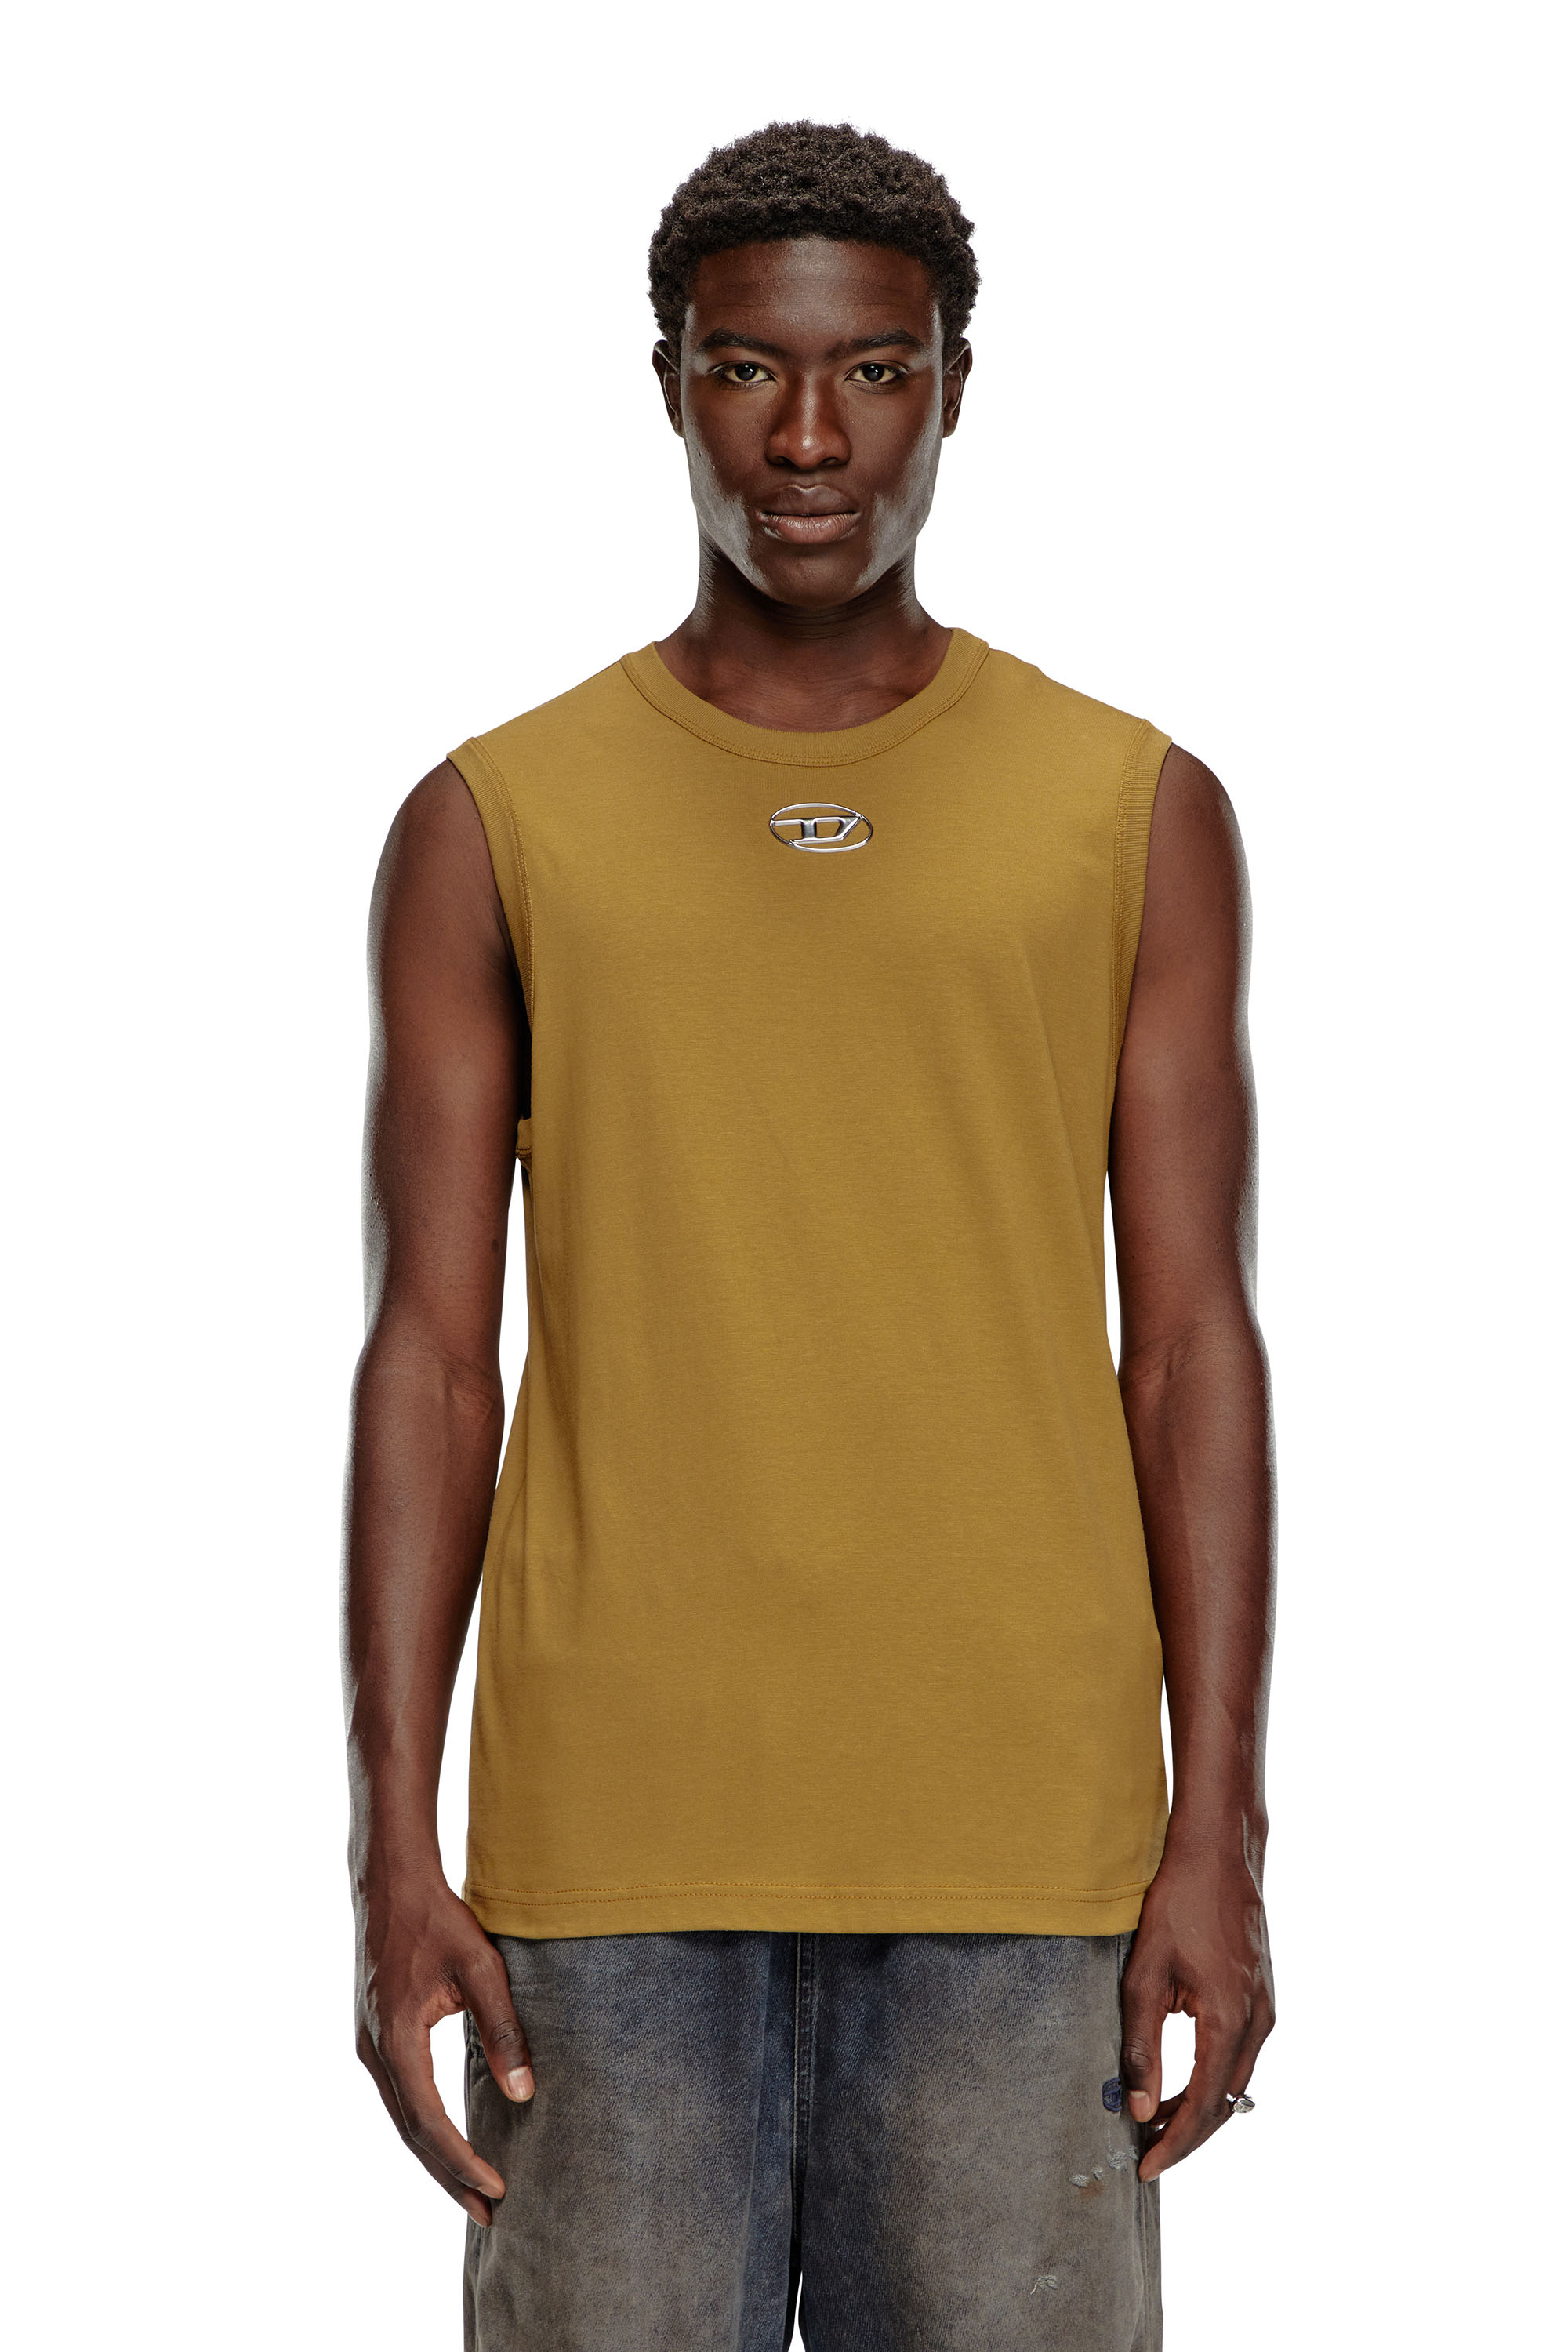 Diesel - T-BISCO-OD, Man Tank top with injection-moulded Oval D in ToBeDefined - Image 1